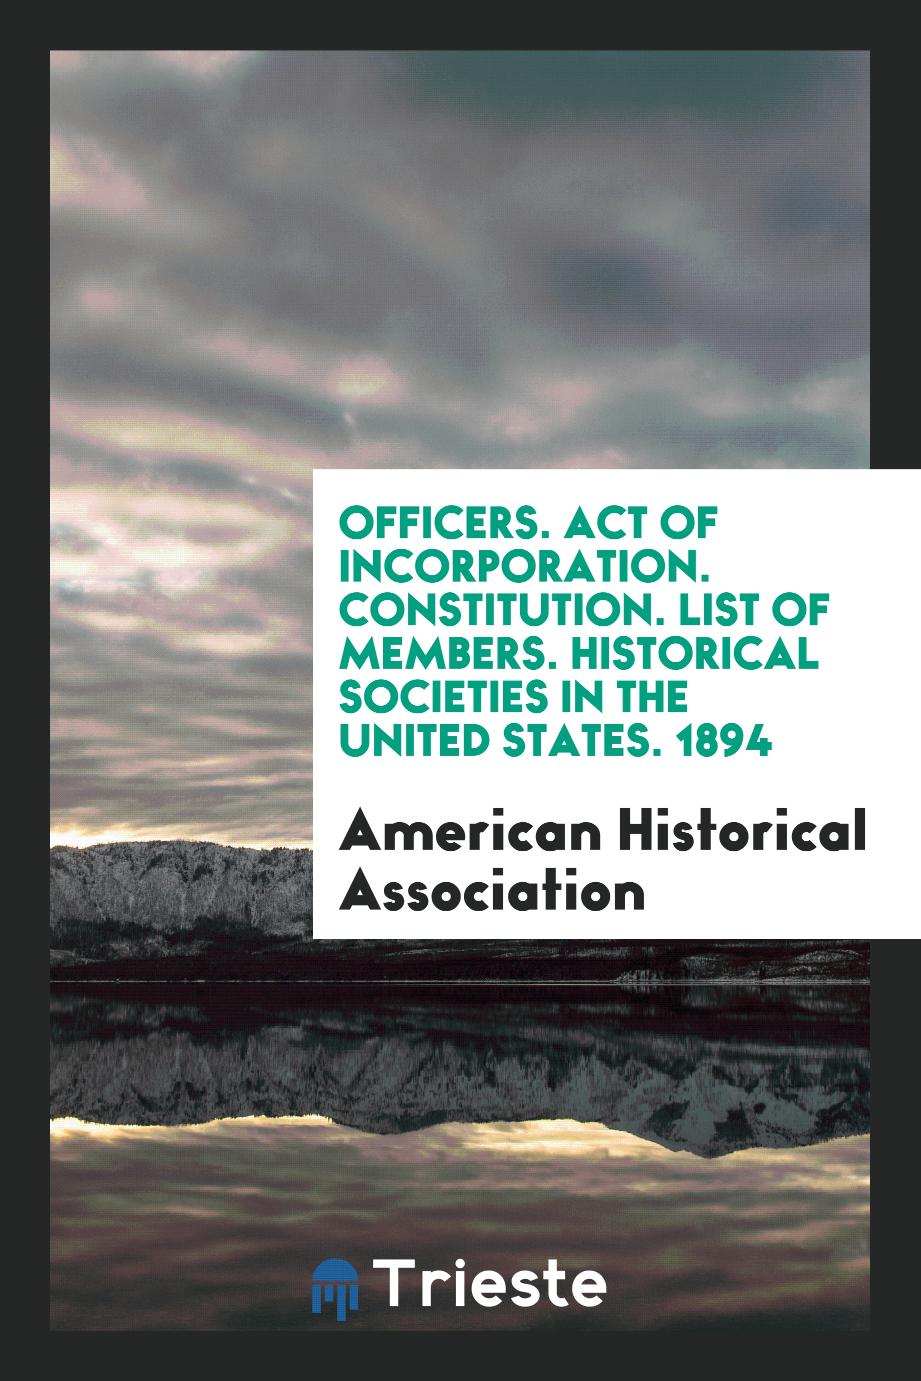 Officers. Act of Incorporation. Constitution. List of members. Historical Societies in the United States. 1894